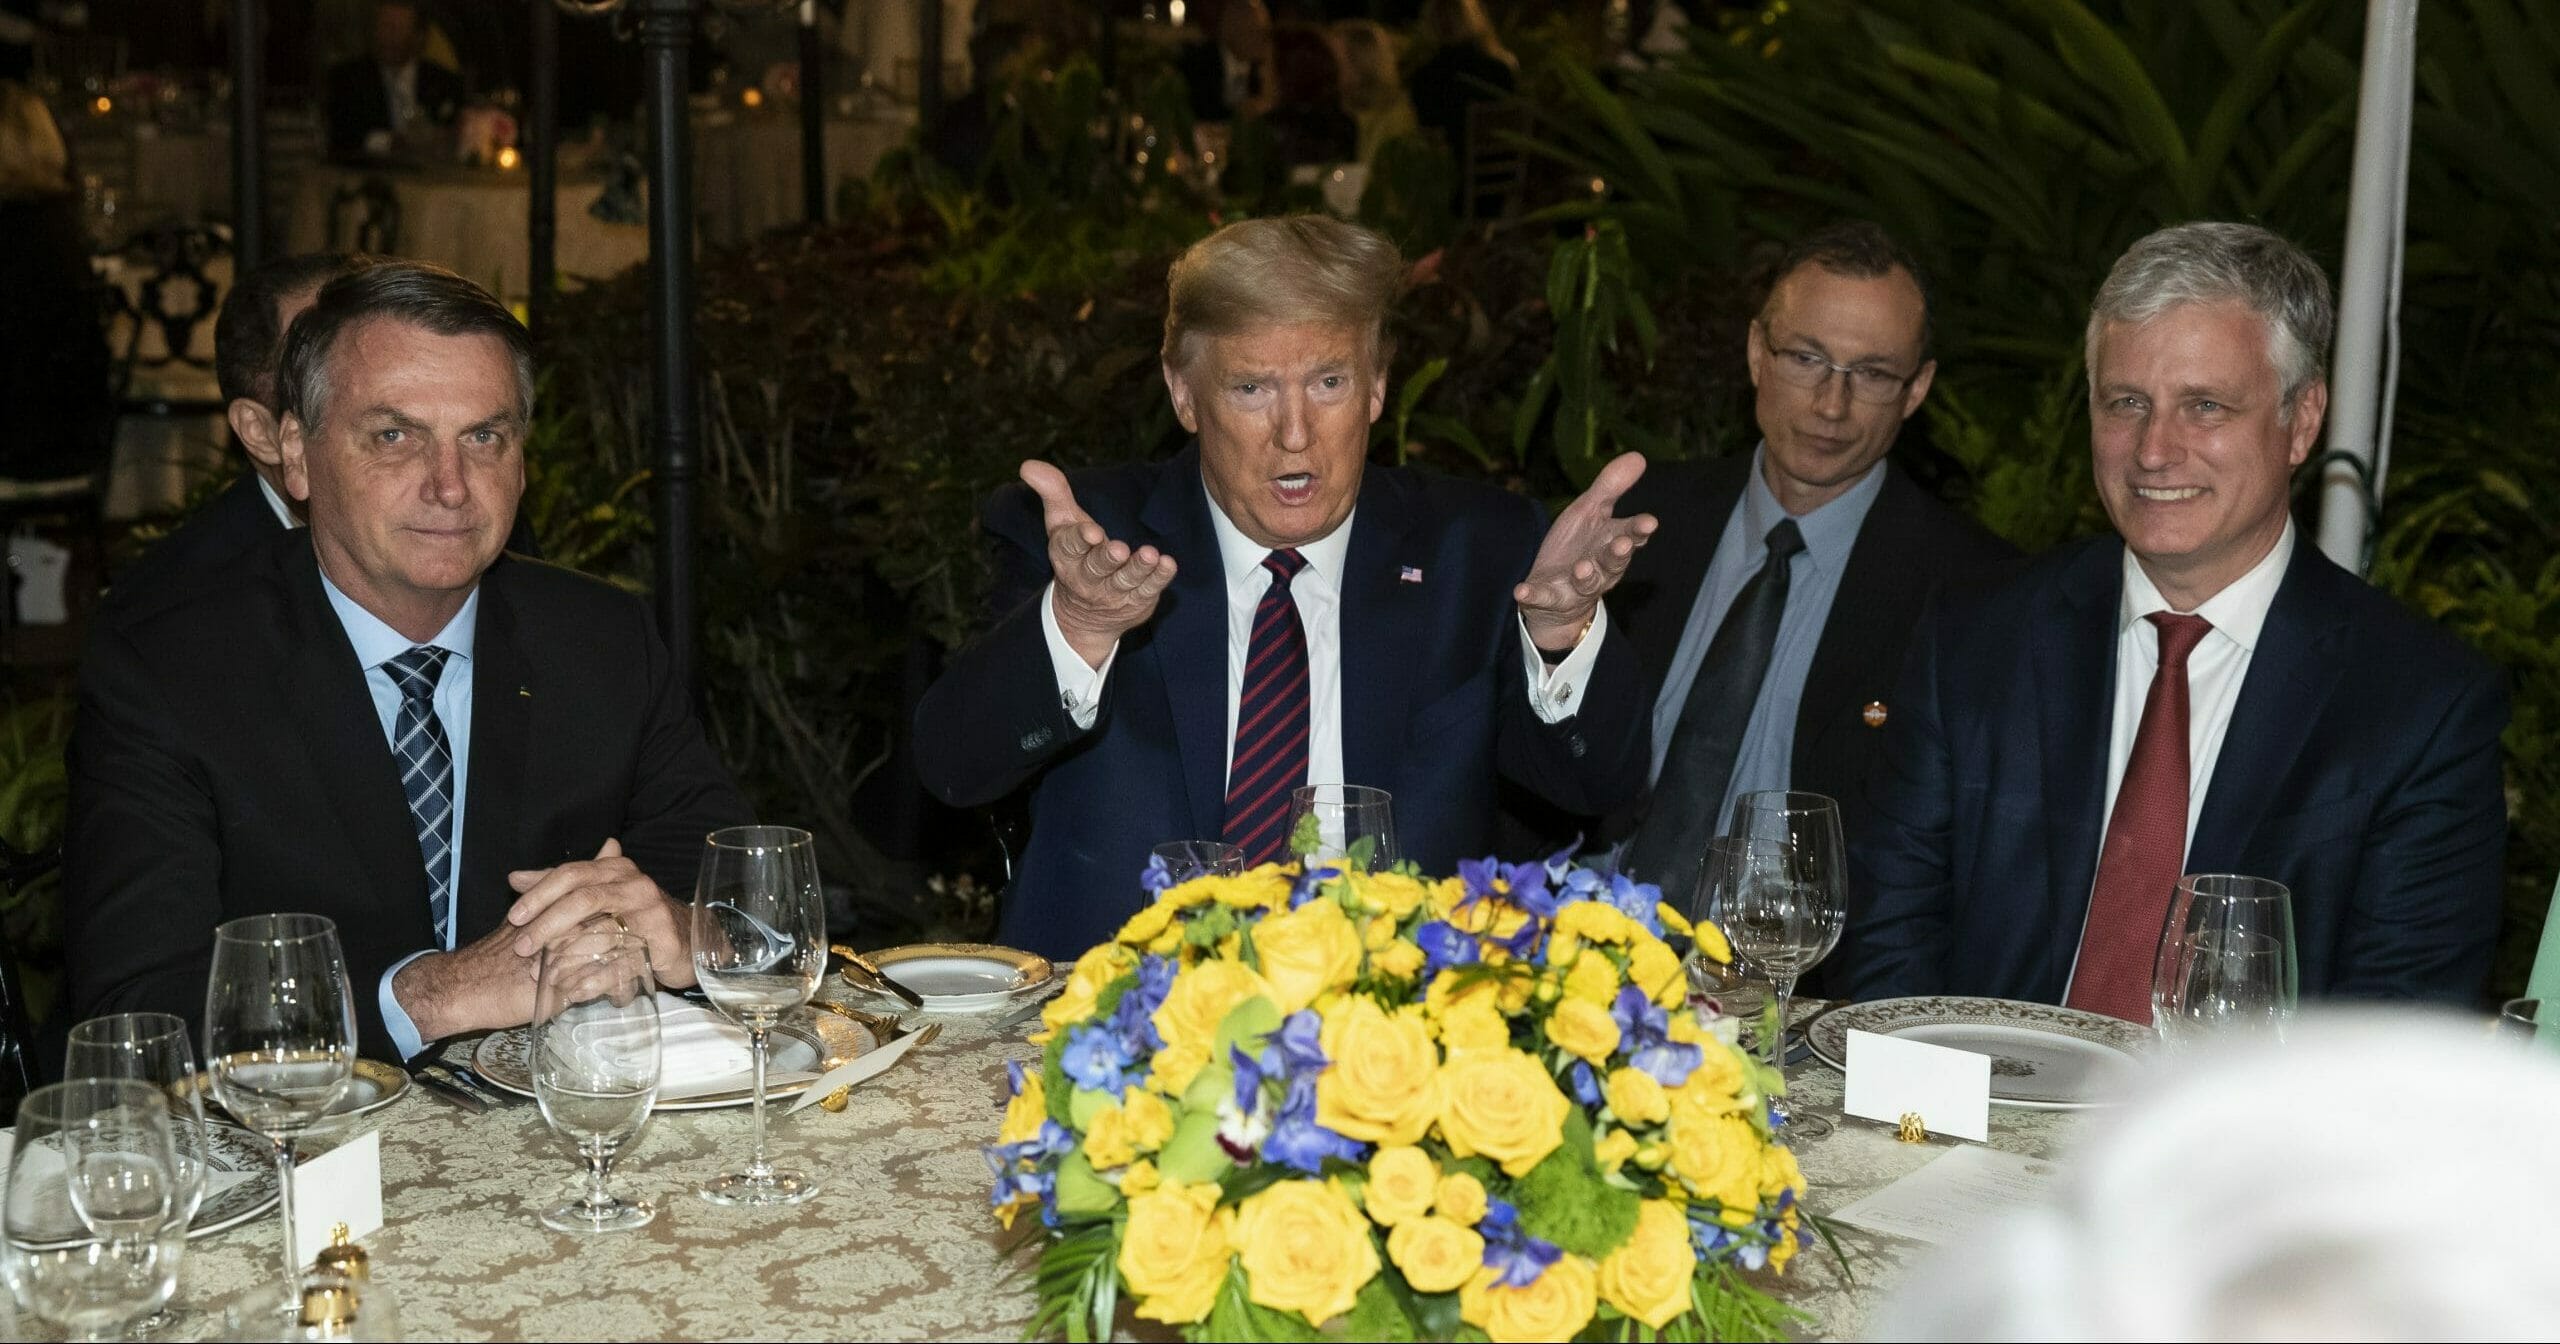 President Donald Trump speaks before a dinner with National Security Advisor Robert O'Brien, right, and Brazilian President Jair Bolsonaro, left, at Mar-a-Lago on March 7, 2020, in Palm Beach, Florida.